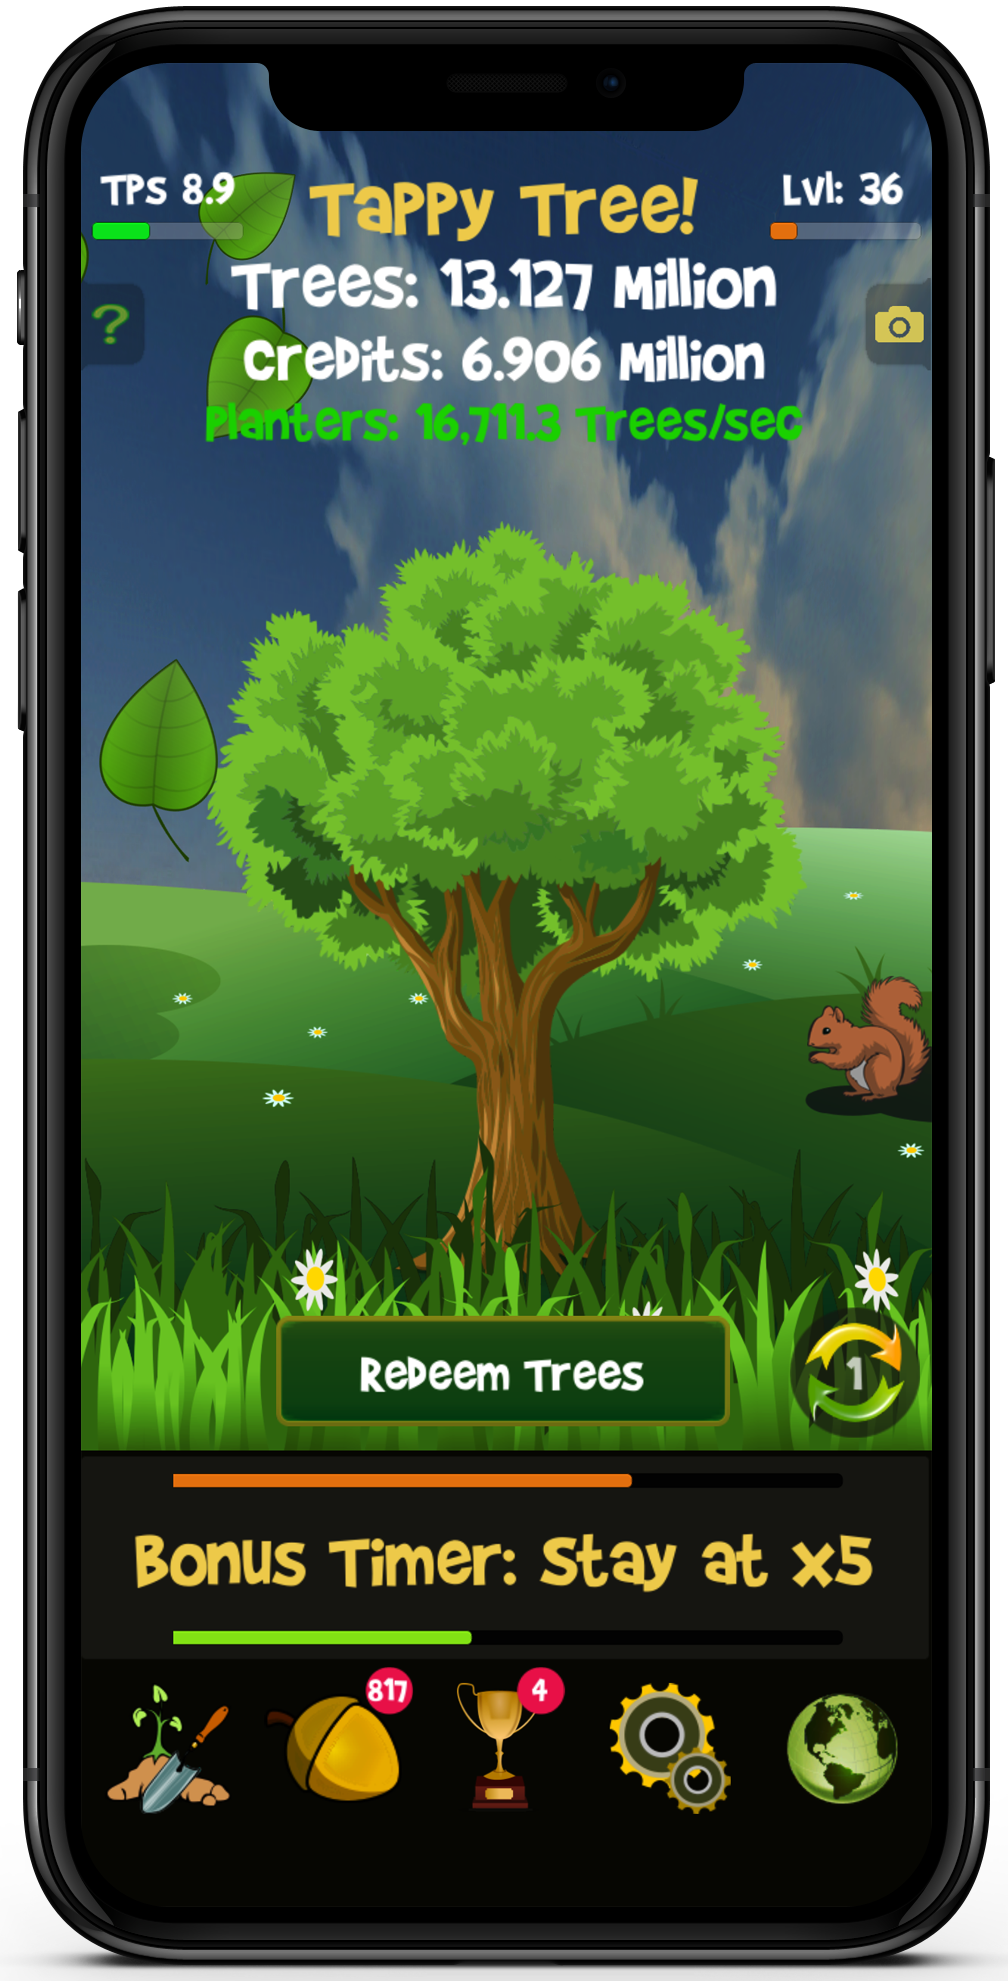 Tappy Tree game on phone